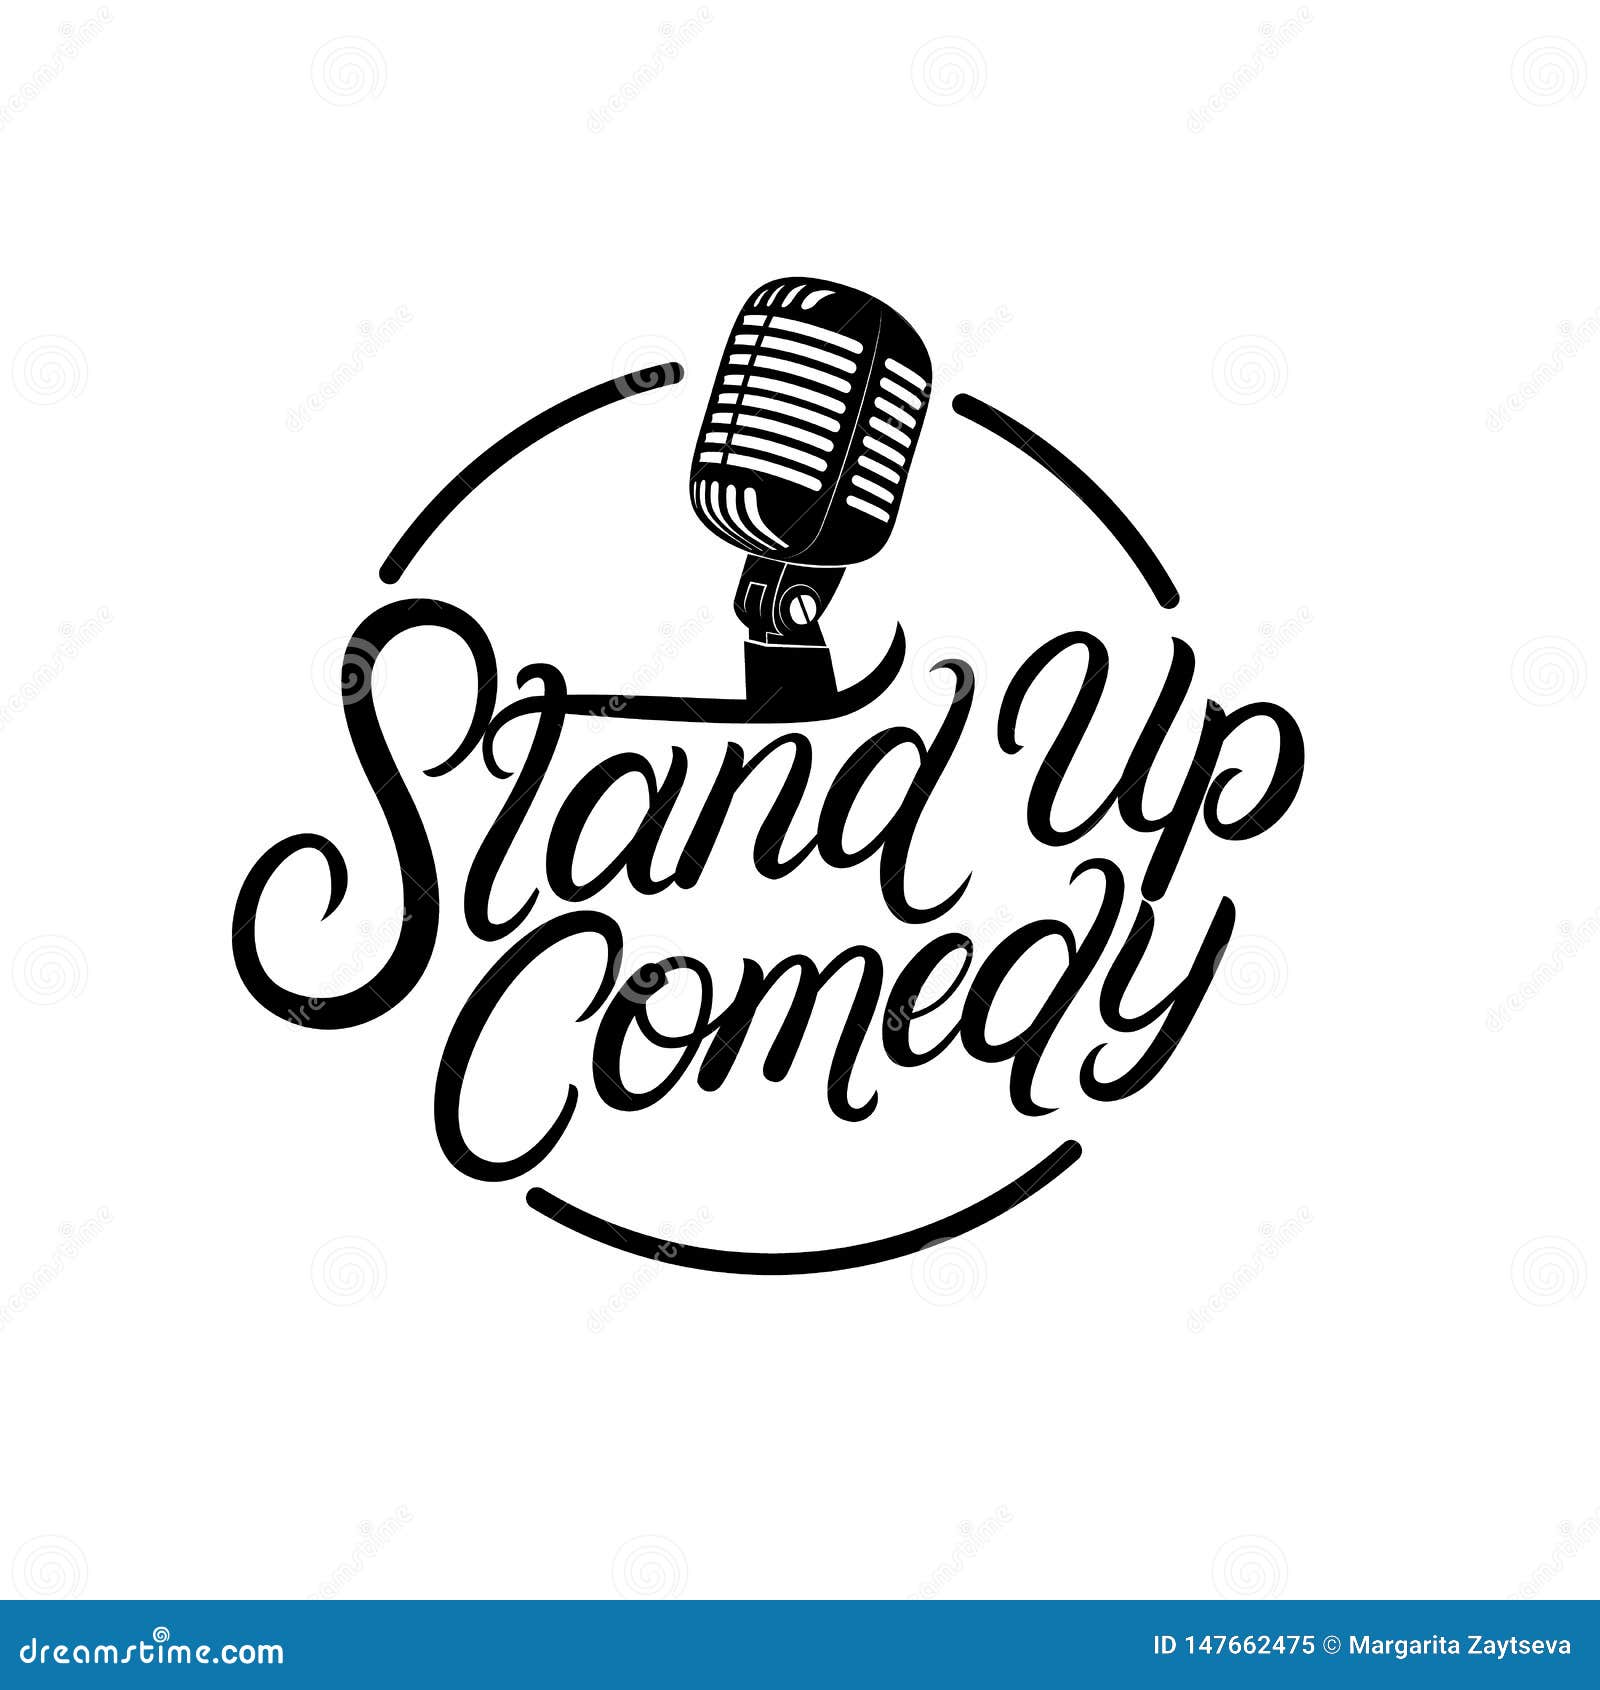 stand up comedy hand written lettering